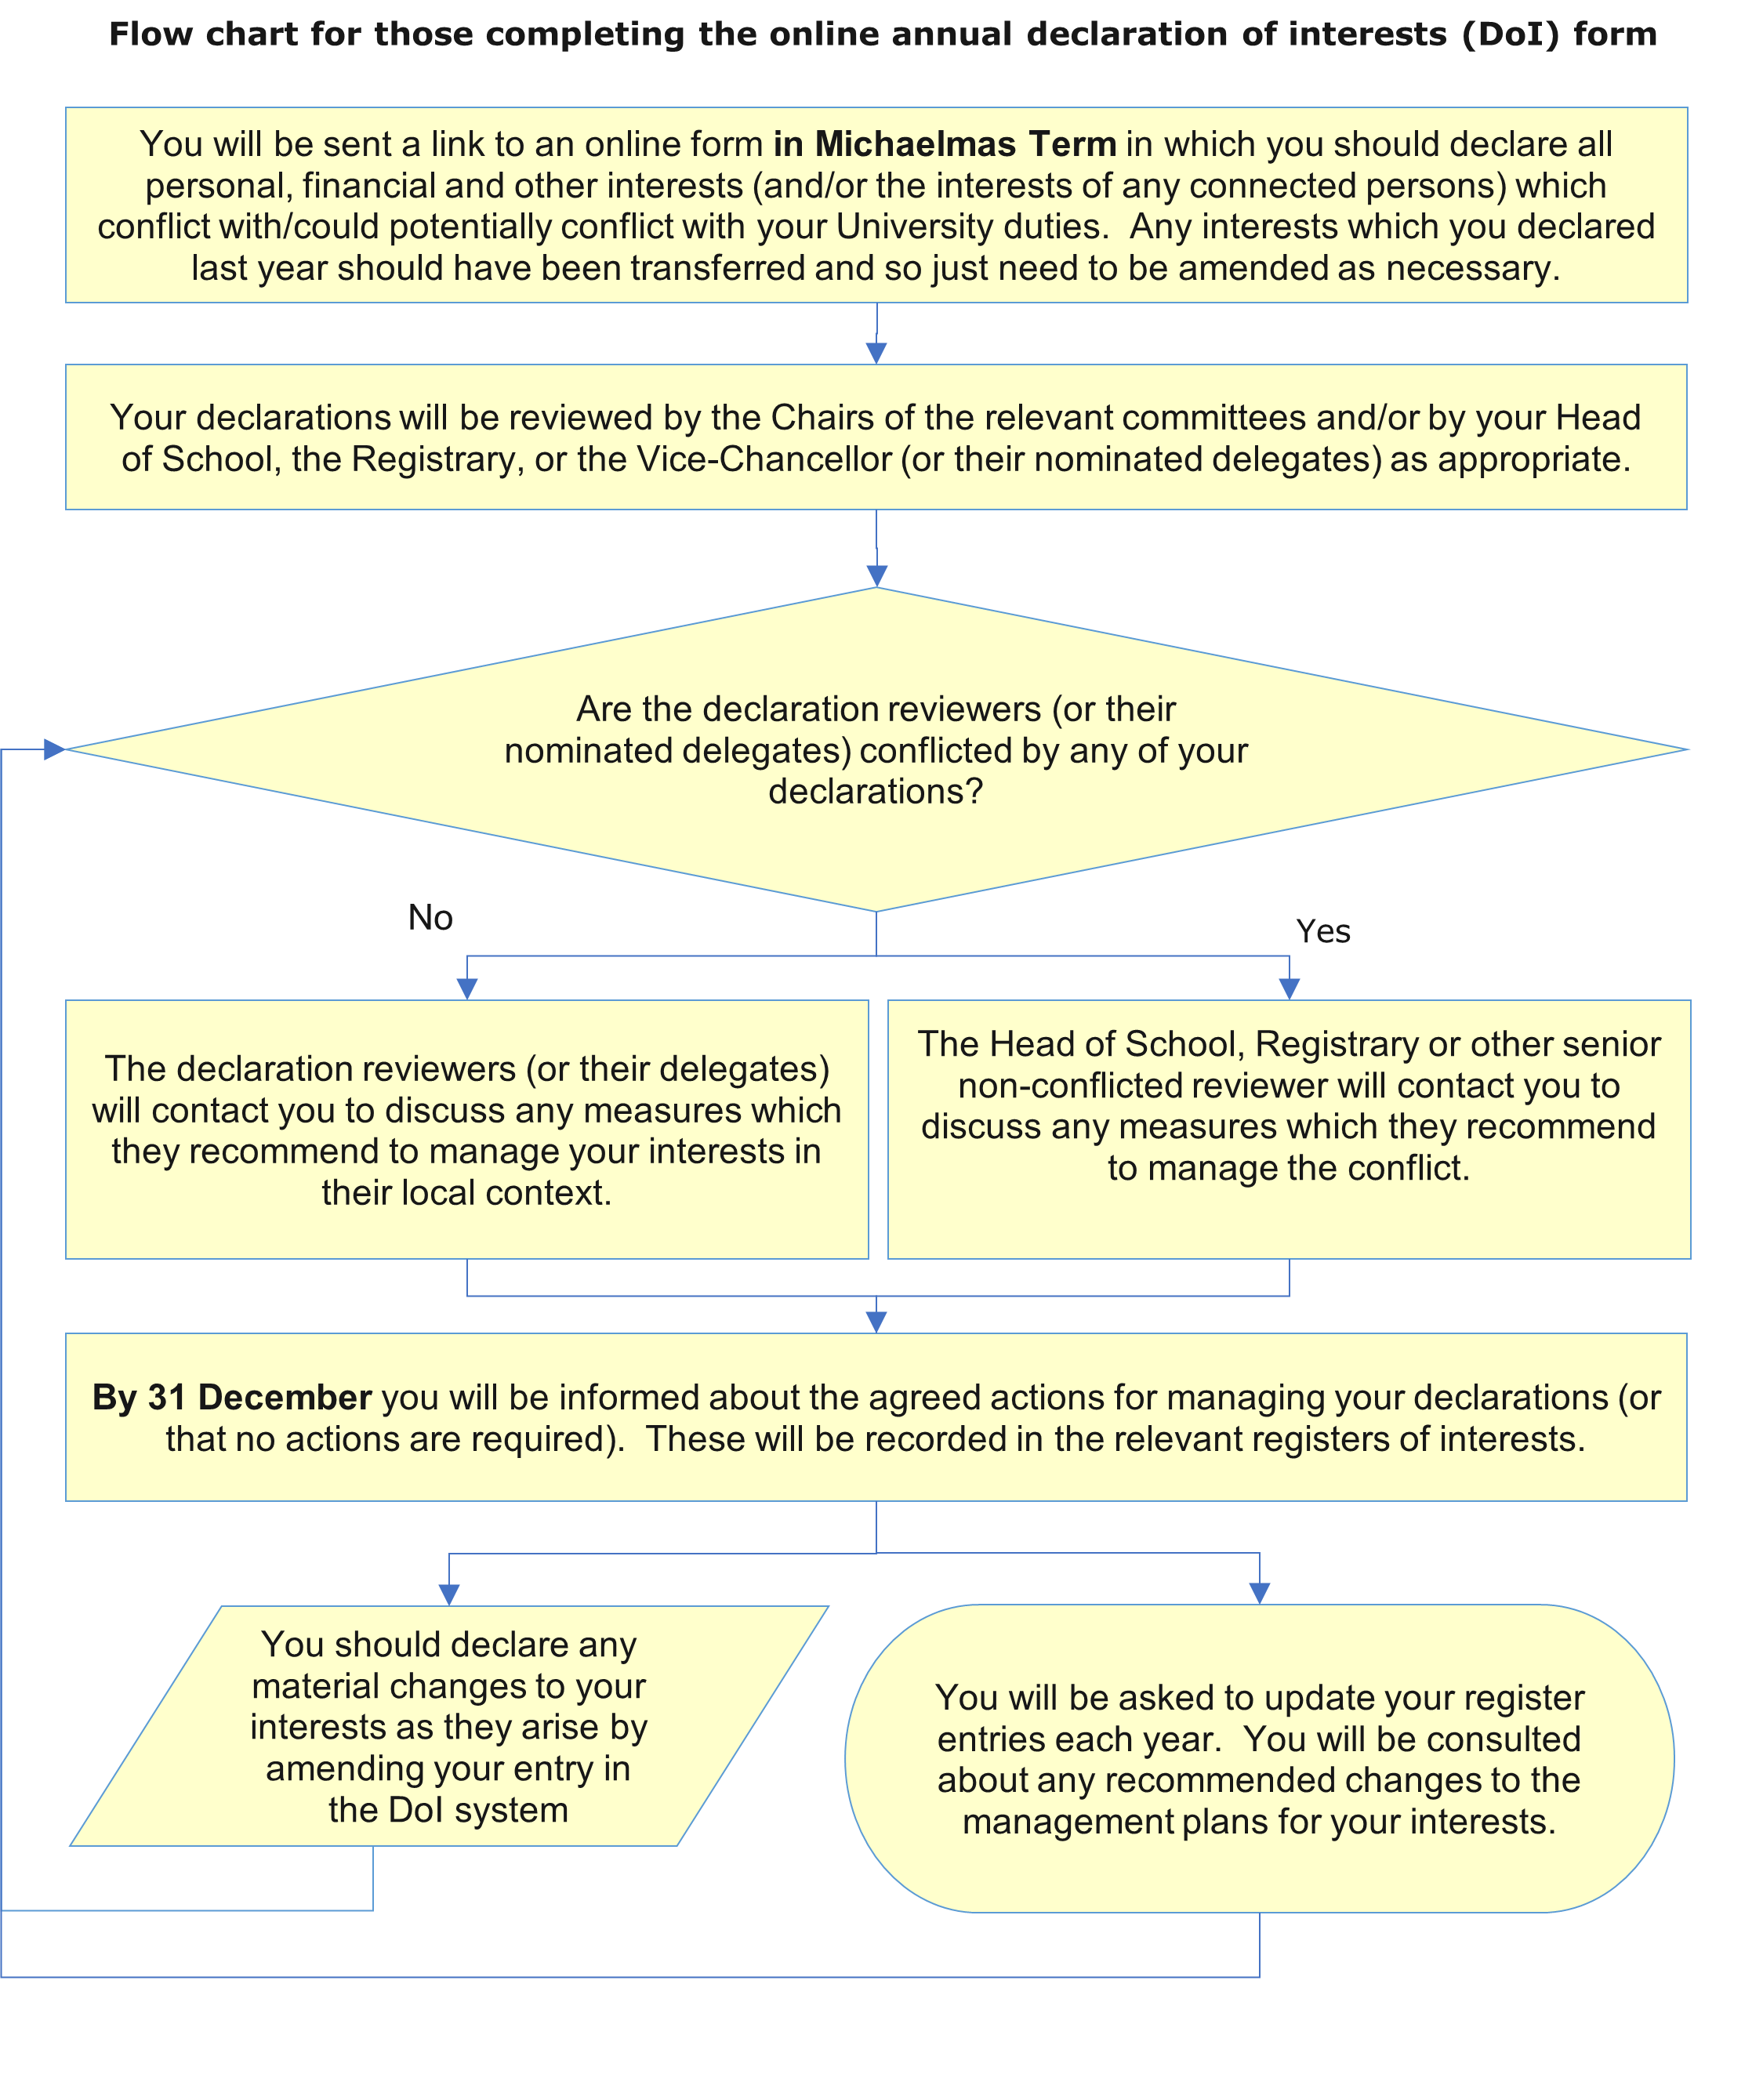 Flow chart for those completing the online annual declaration of interests (DoI) form